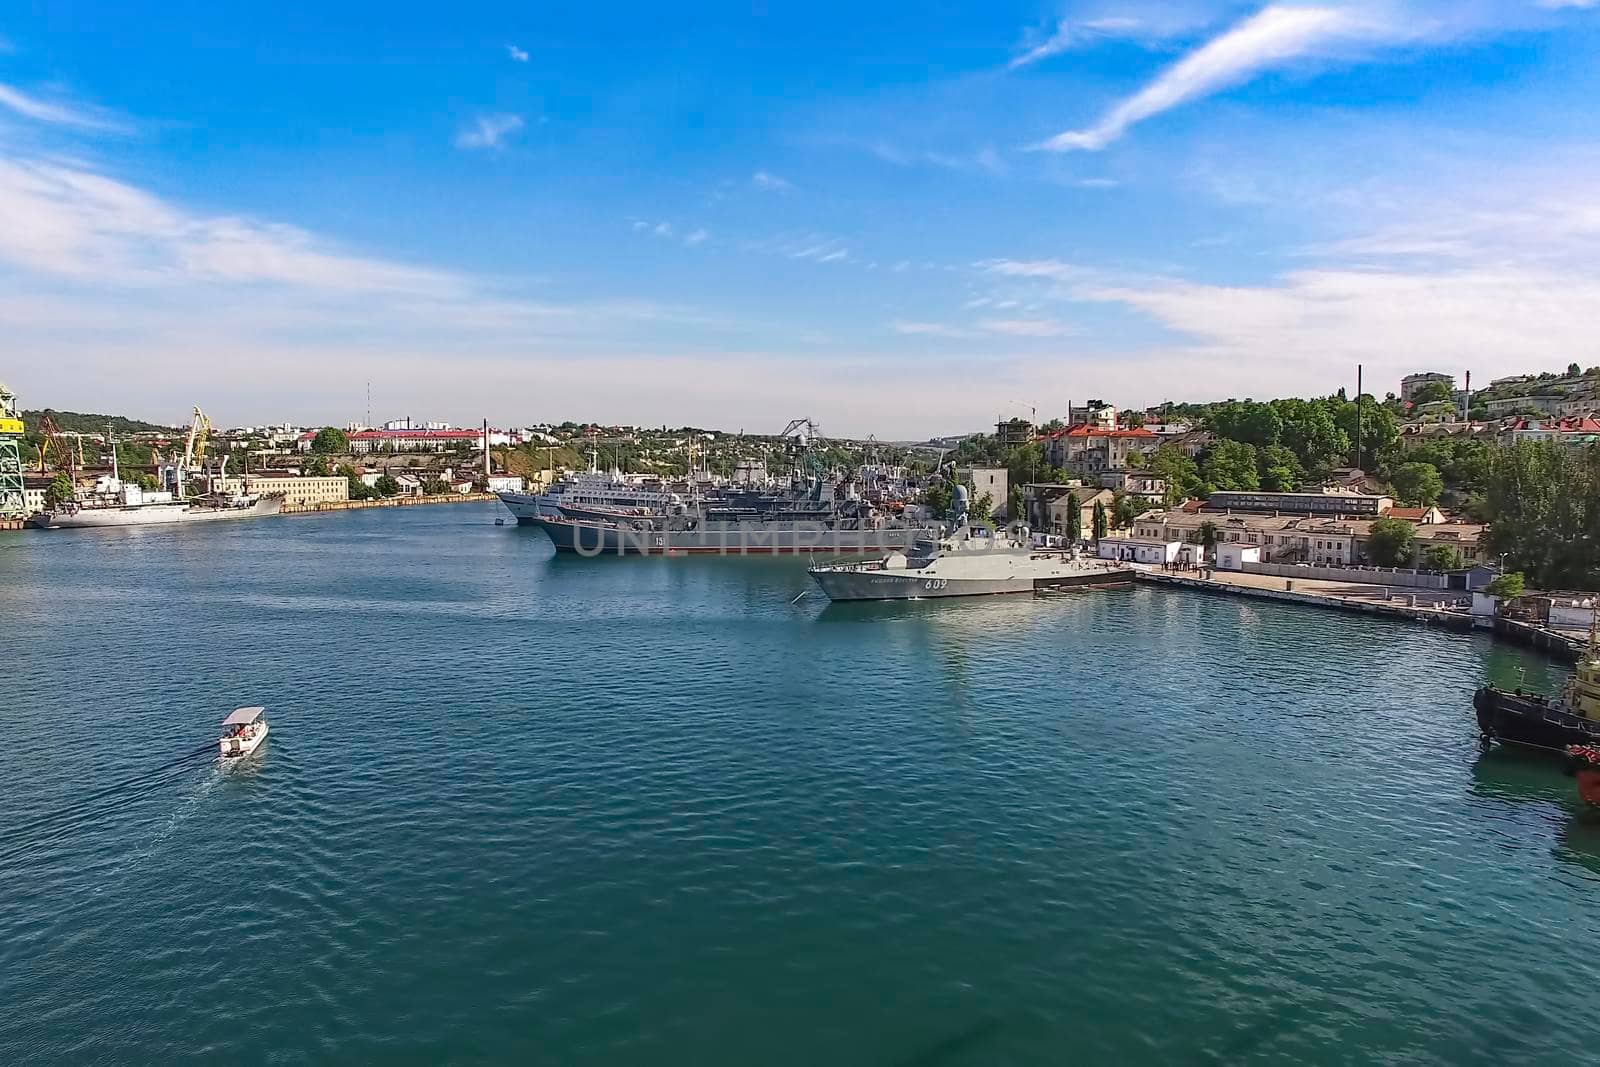 Aerial view of the urban landscape of Sevastopol overlooking the Bay and warships, Crimea.